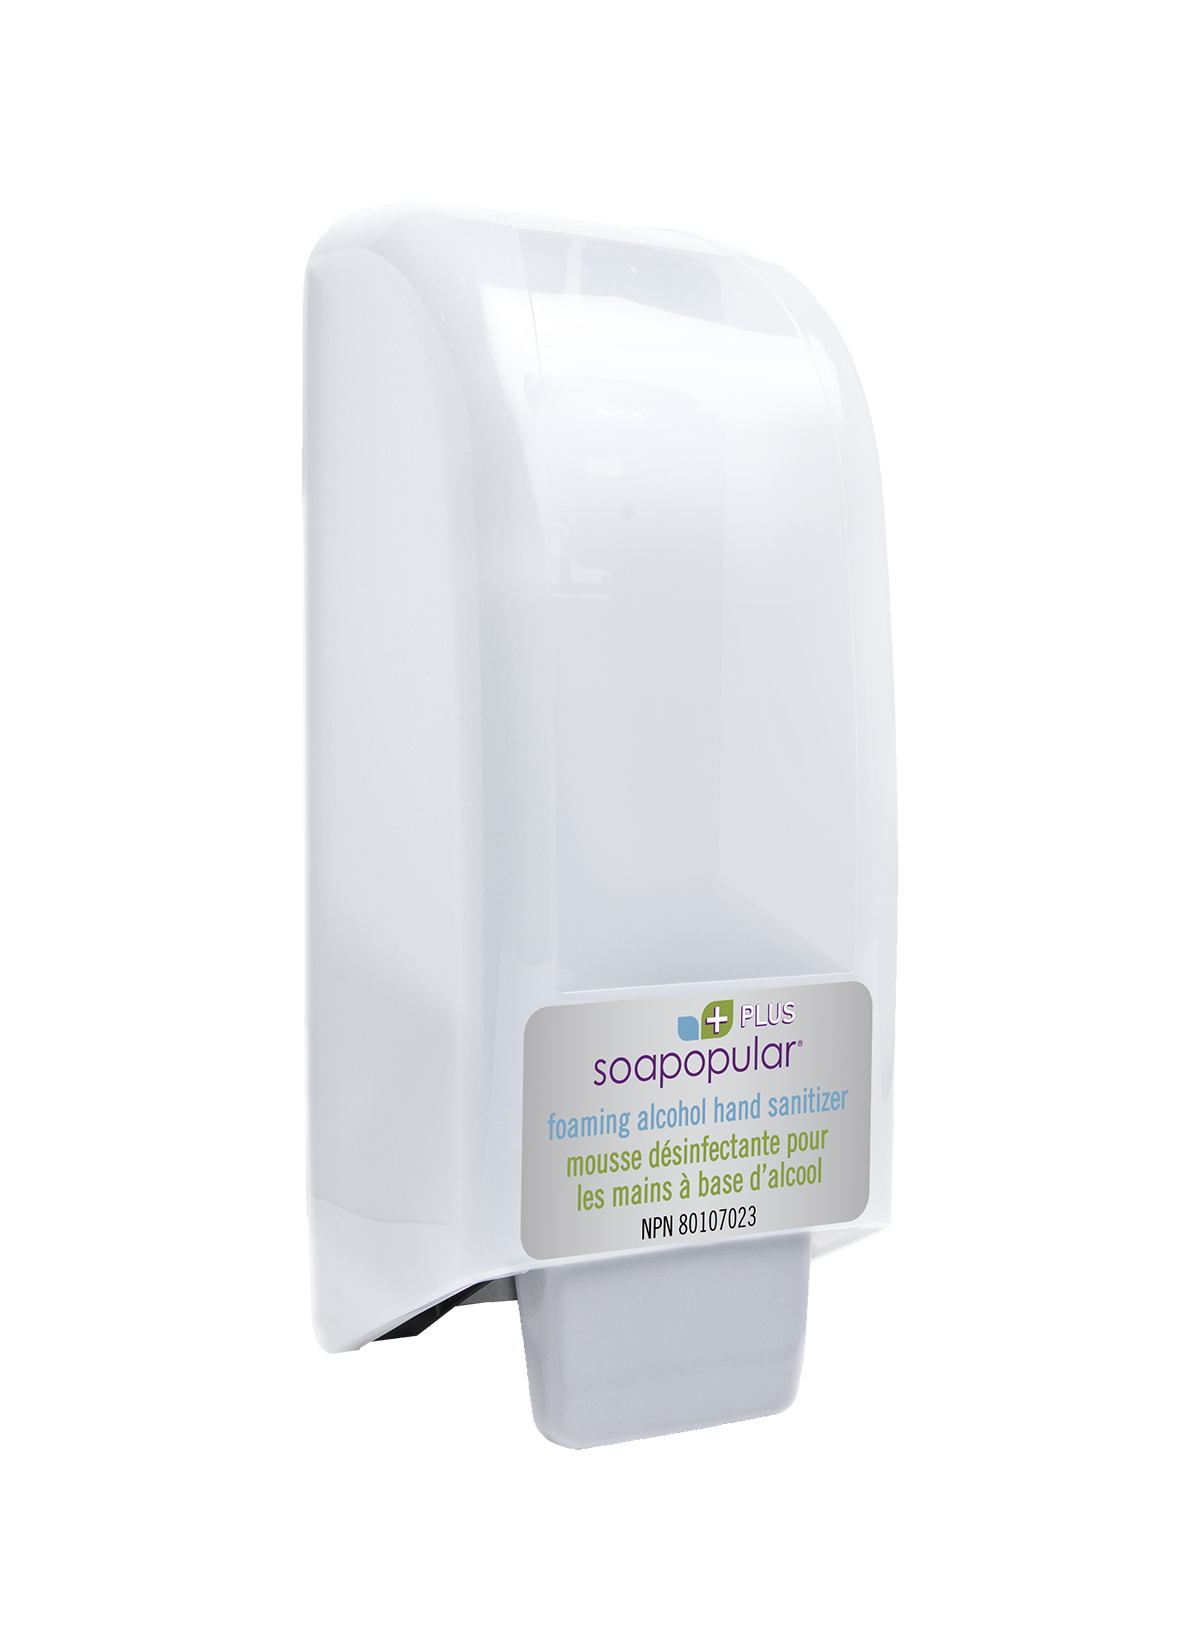 Soapopular 70% alcohol sanitizer manual dispenser comes with a cover that protects the sanitizer from pilferage risk.